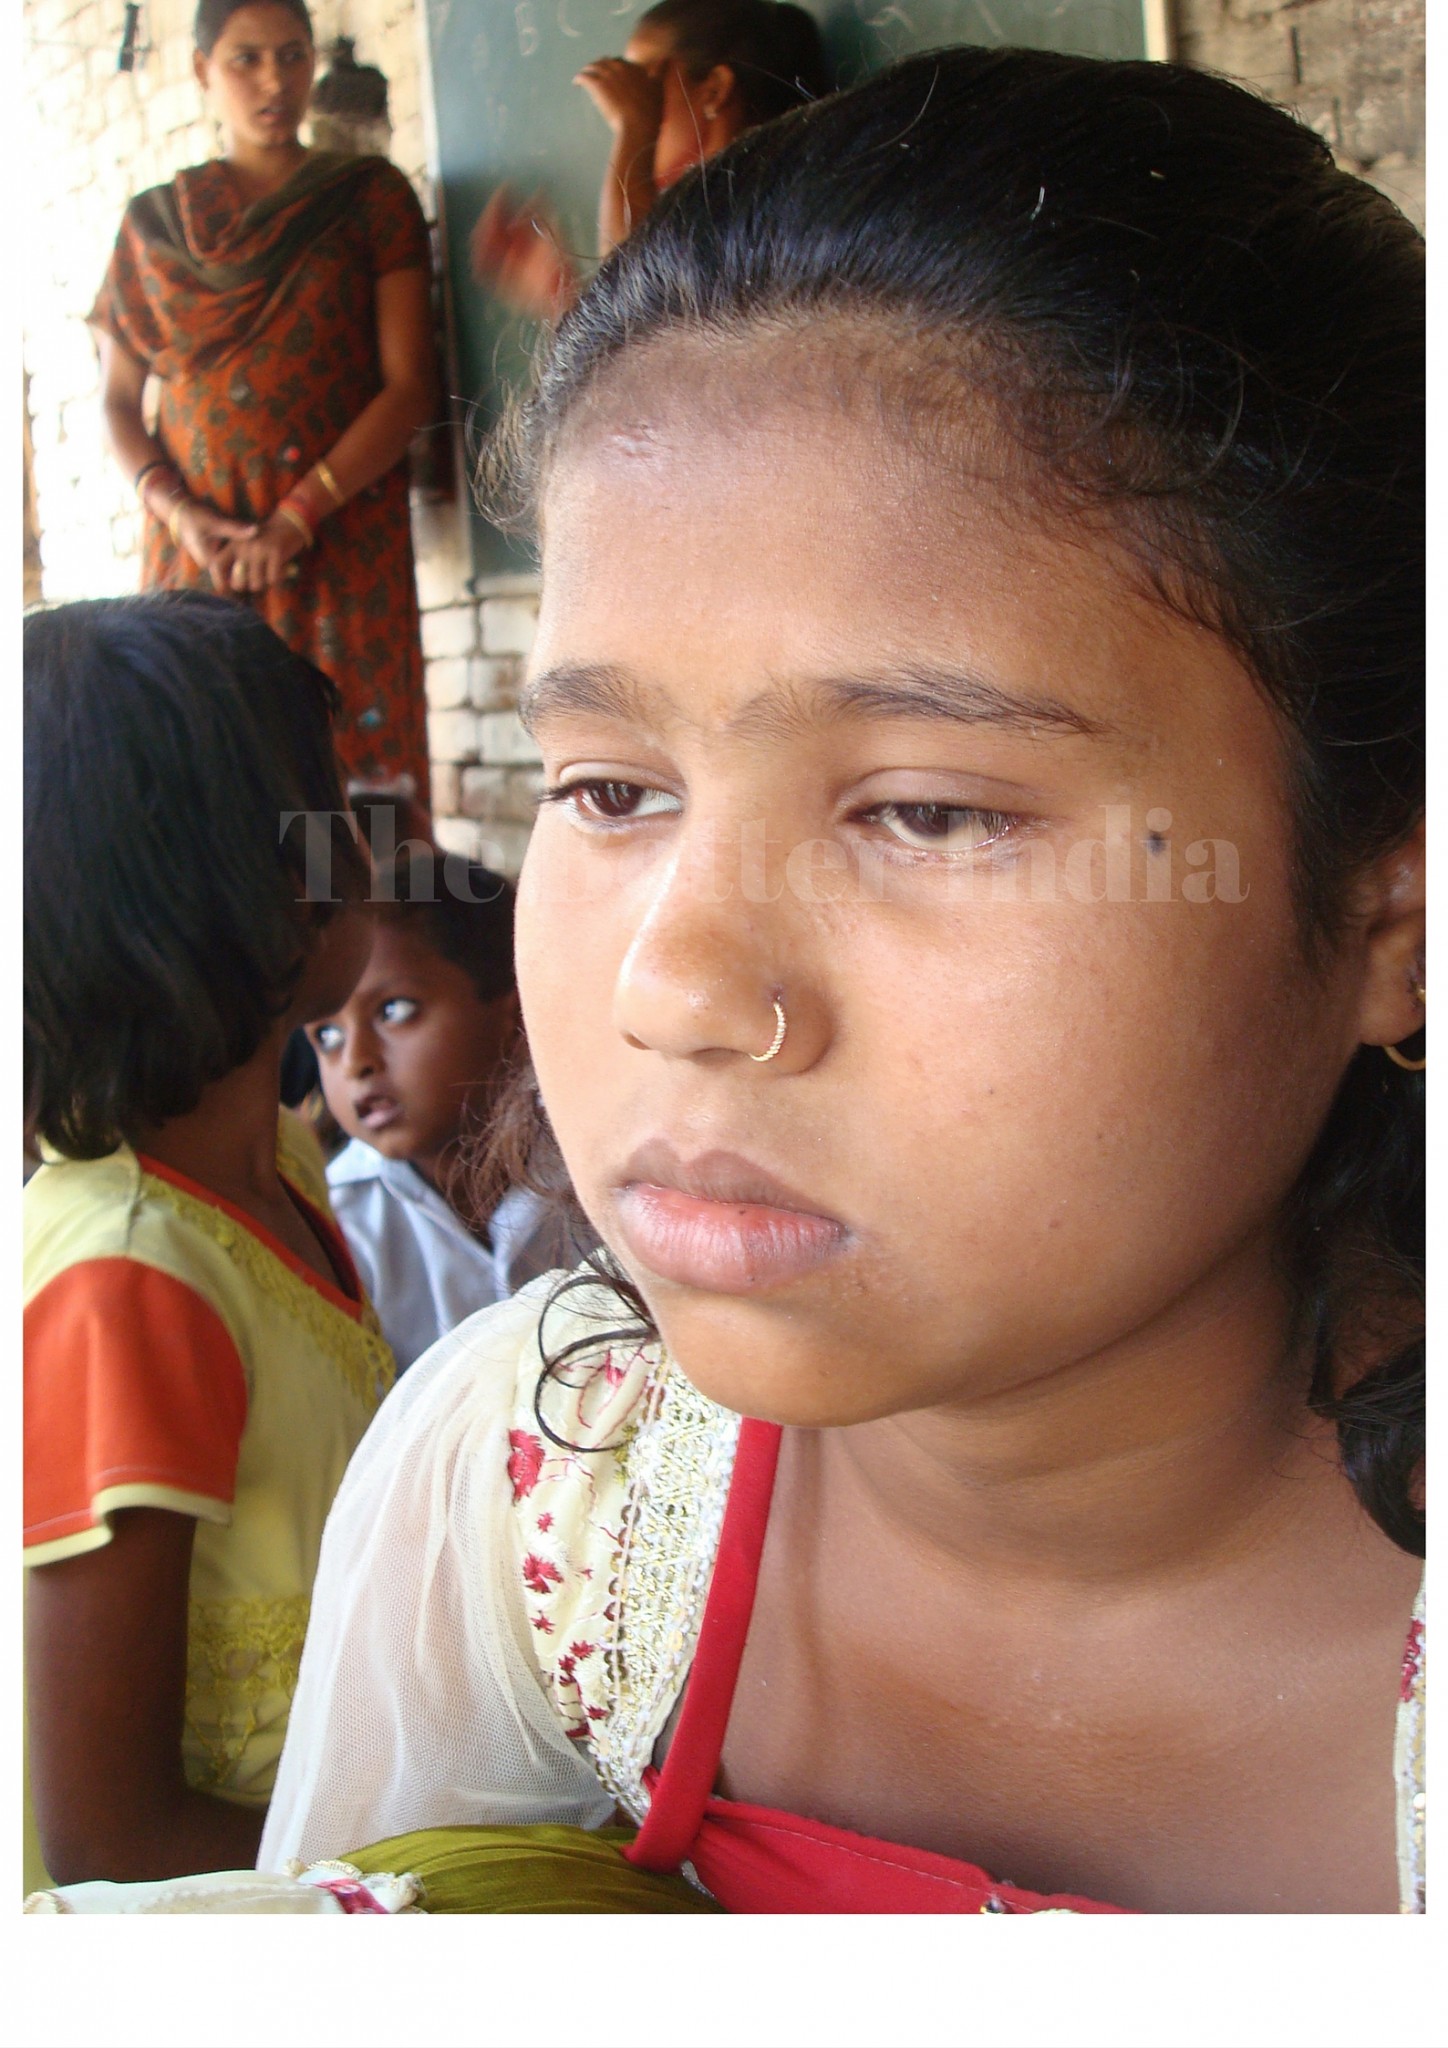 Eight-year-old Nita after her eye operation, that happened thanks to Gudiya's school. (Credit: Anjali Singh\WFS)